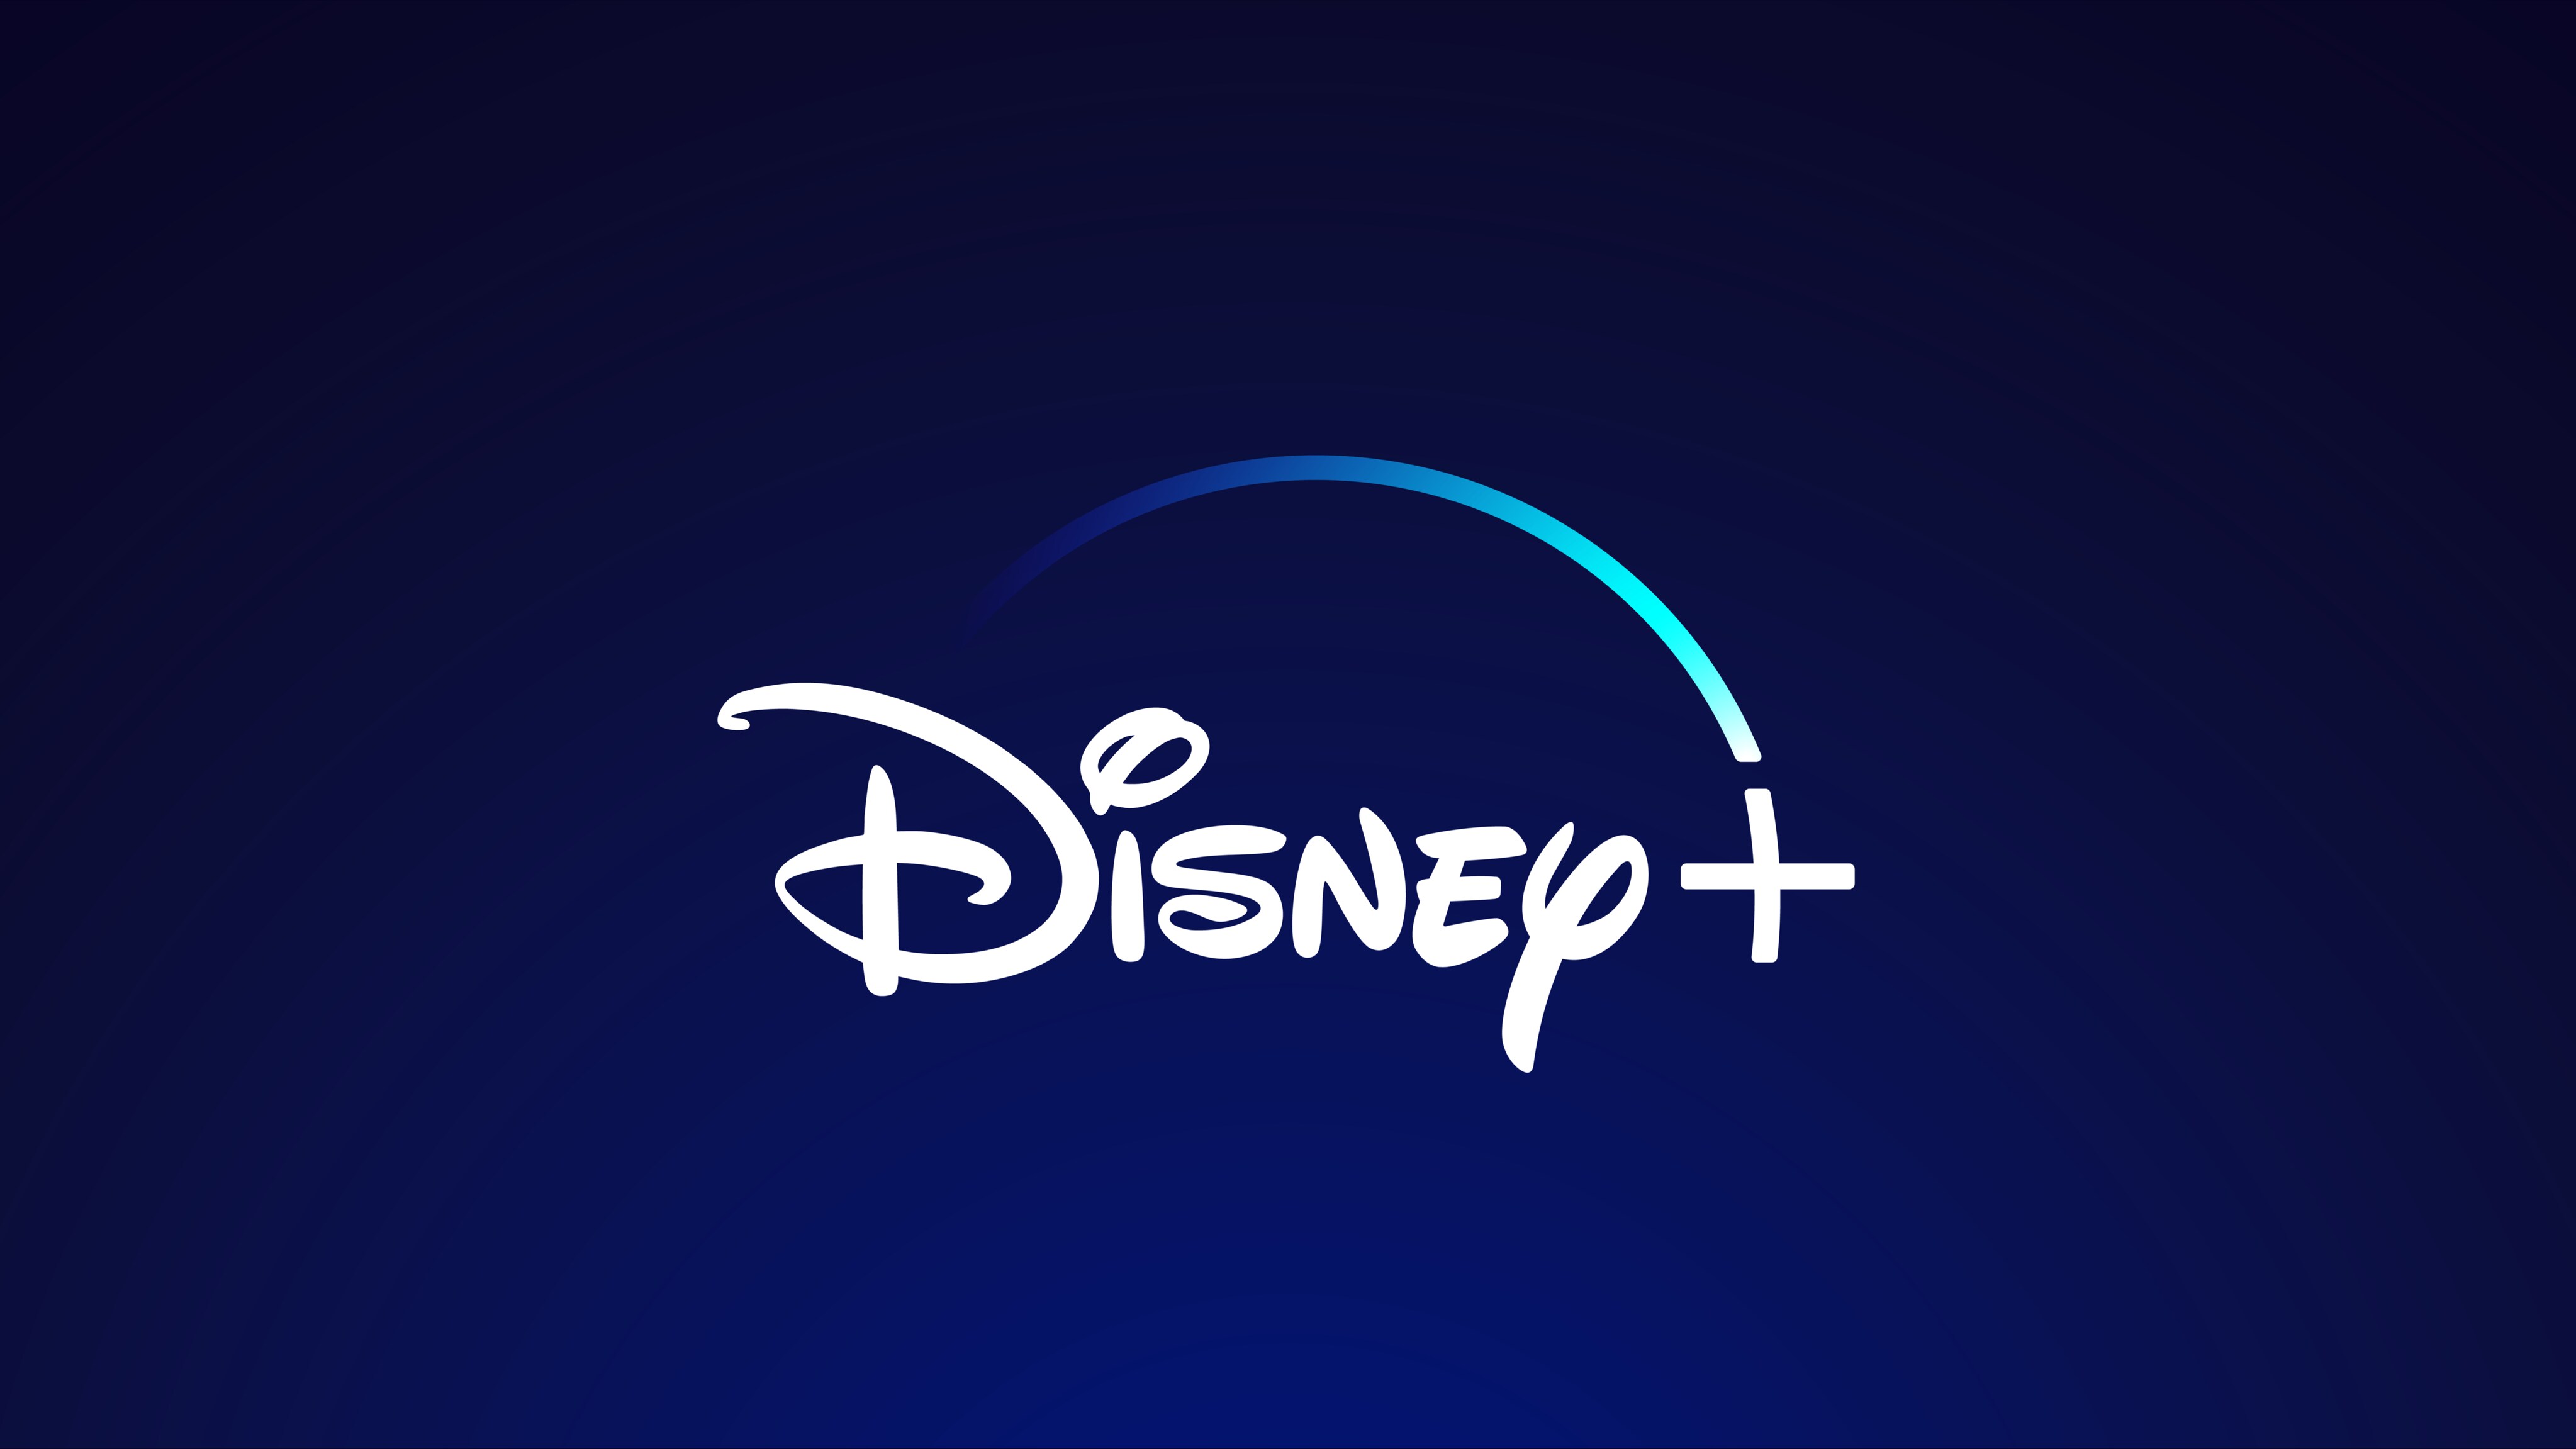 Disney+ Joins Comic-con@Home July 23-26 To Present Upcoming Originals “Phineas And Ferb The Movie: Candace Against The Universe,” Marvel’s 616,” And “The Right Stuff” 